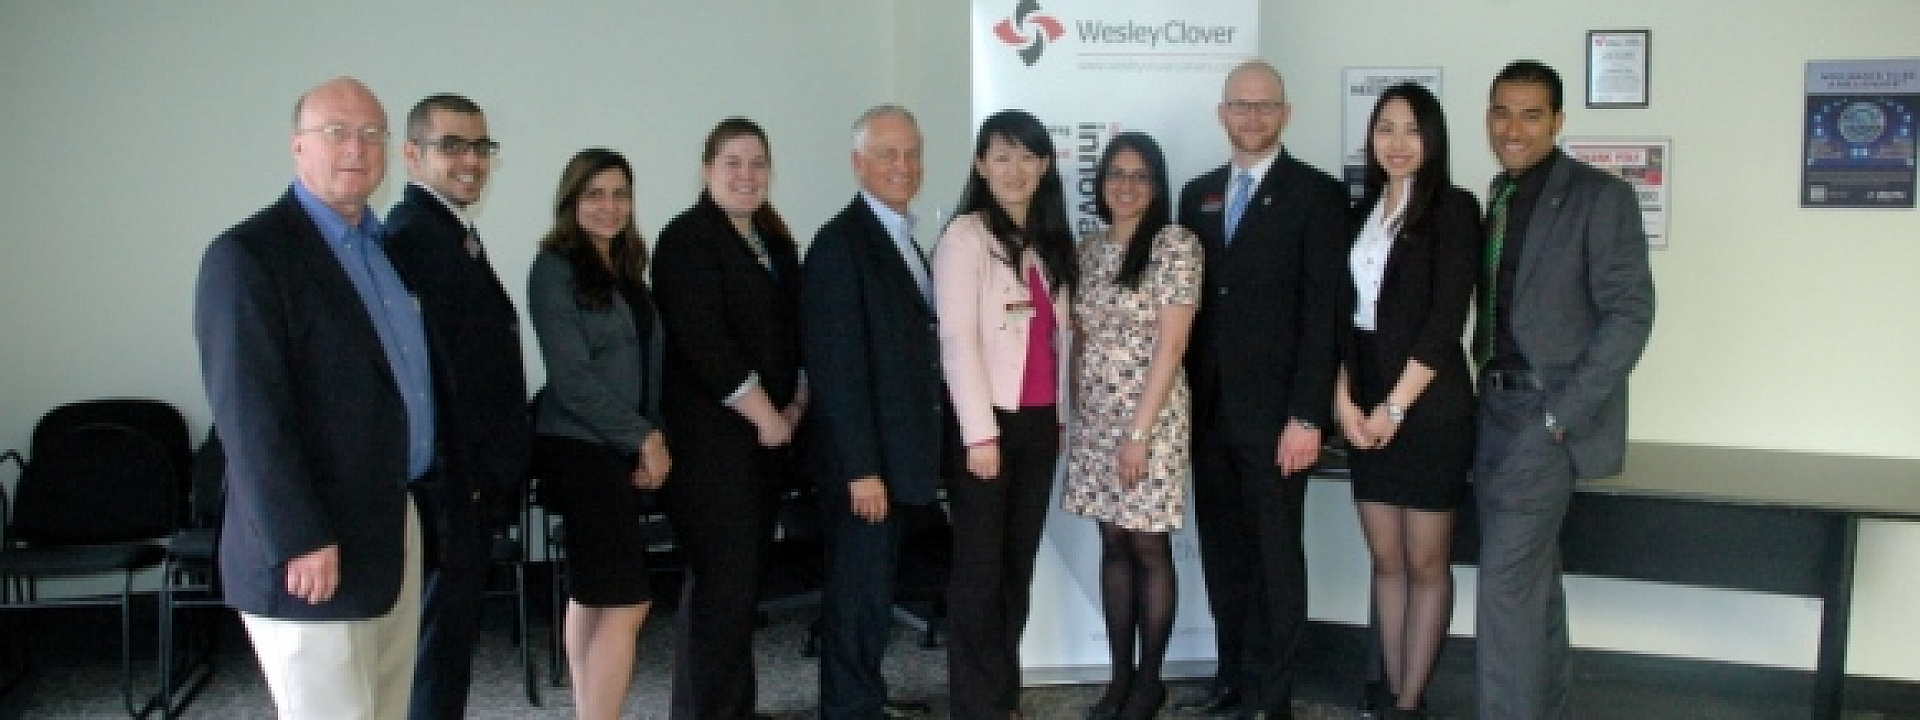 MBA students at Welsey Clover